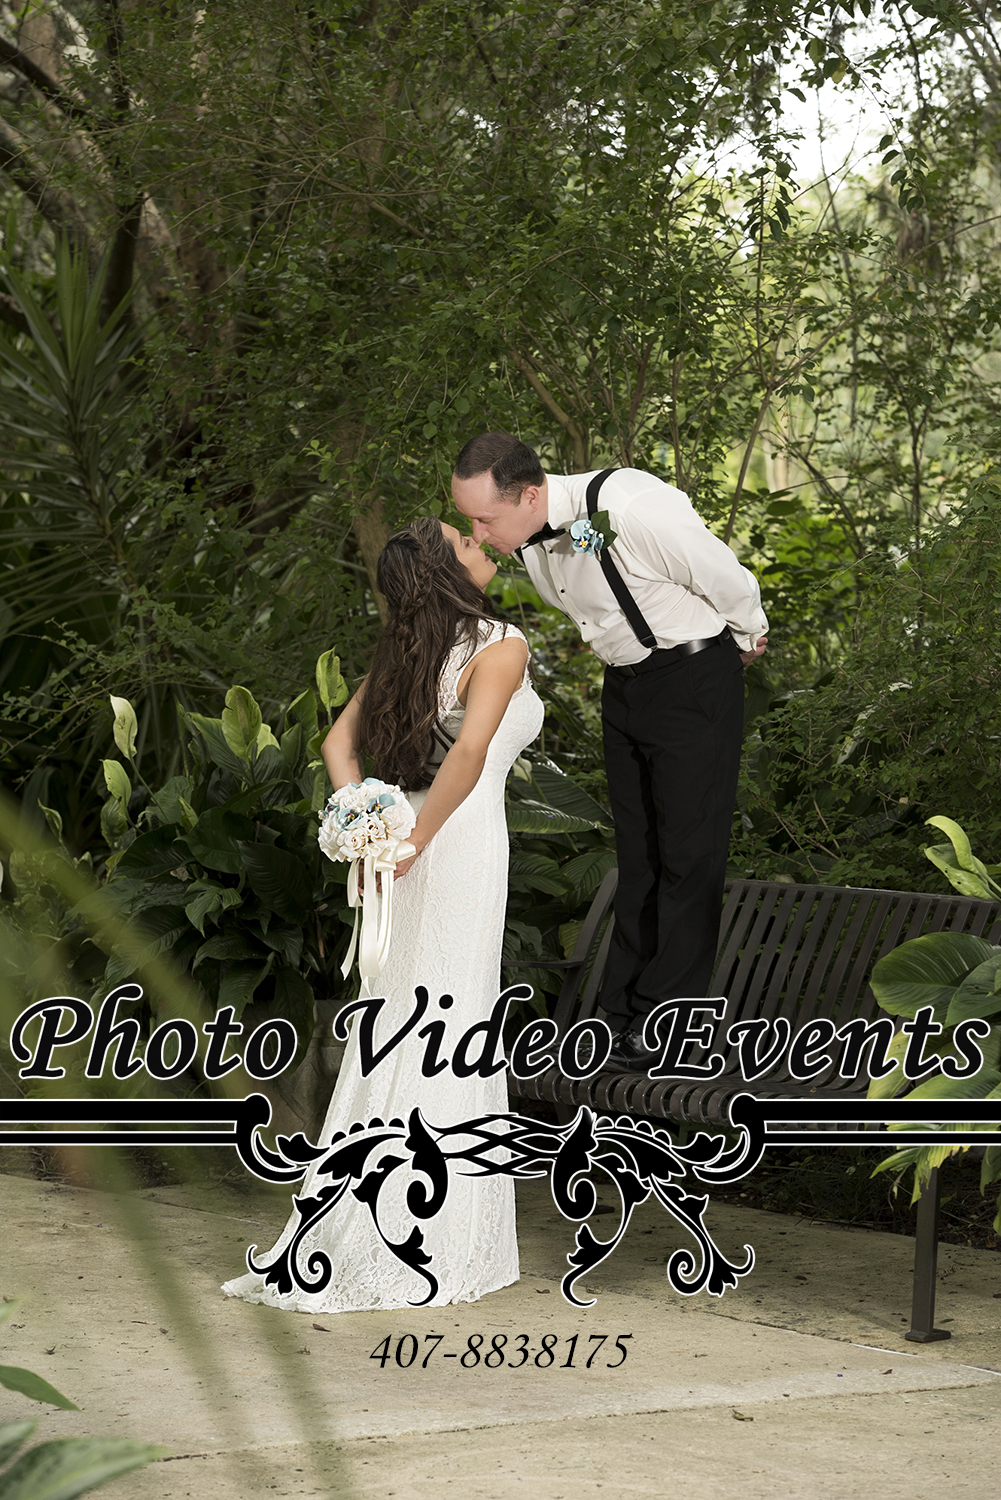 Renewal of marriage Photographer